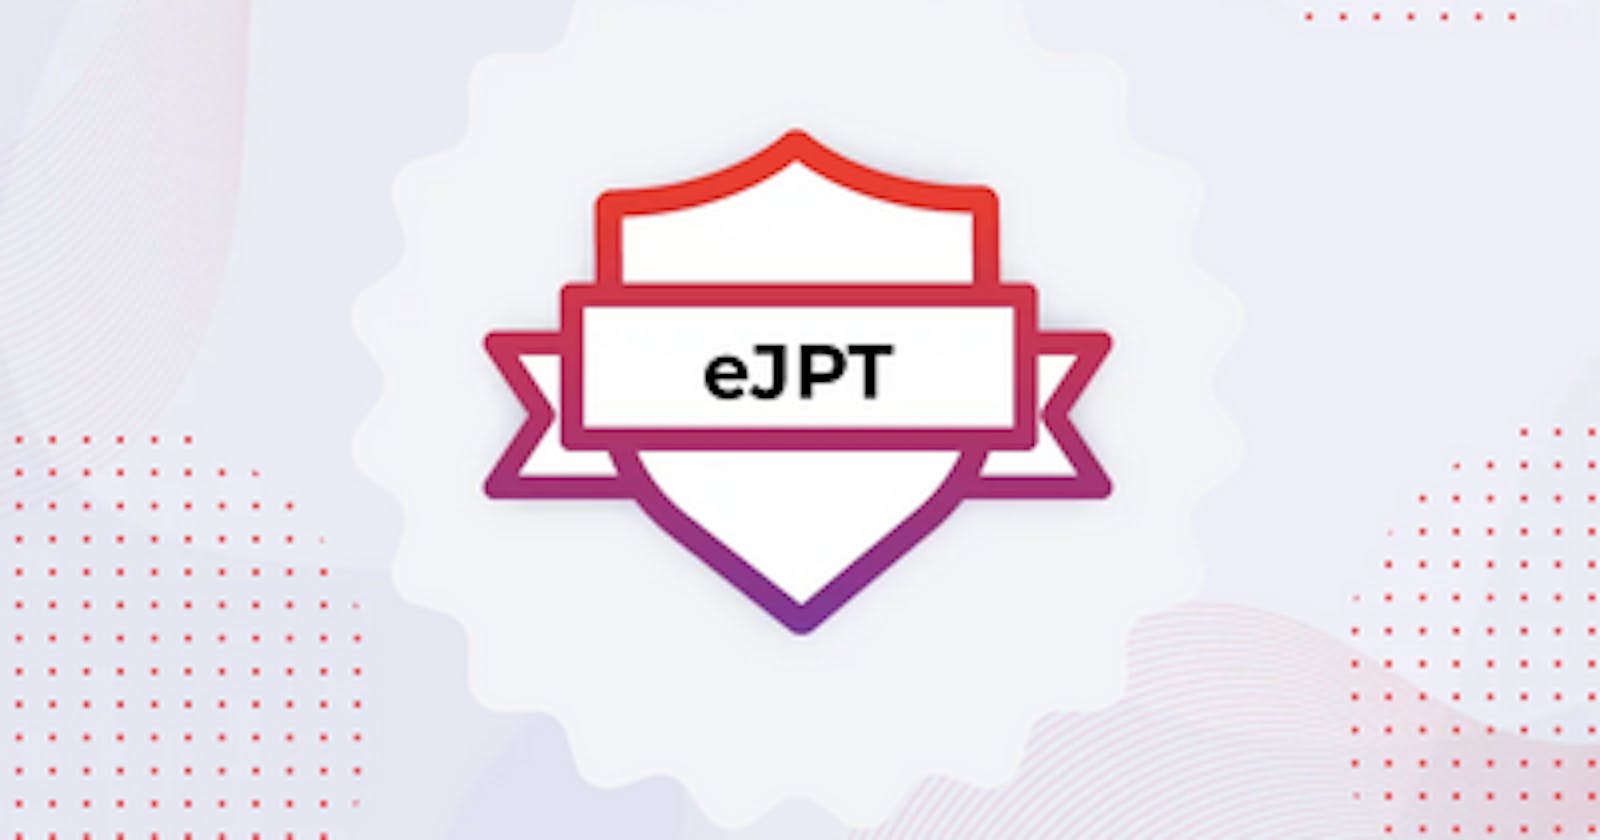 My EJPT Experience